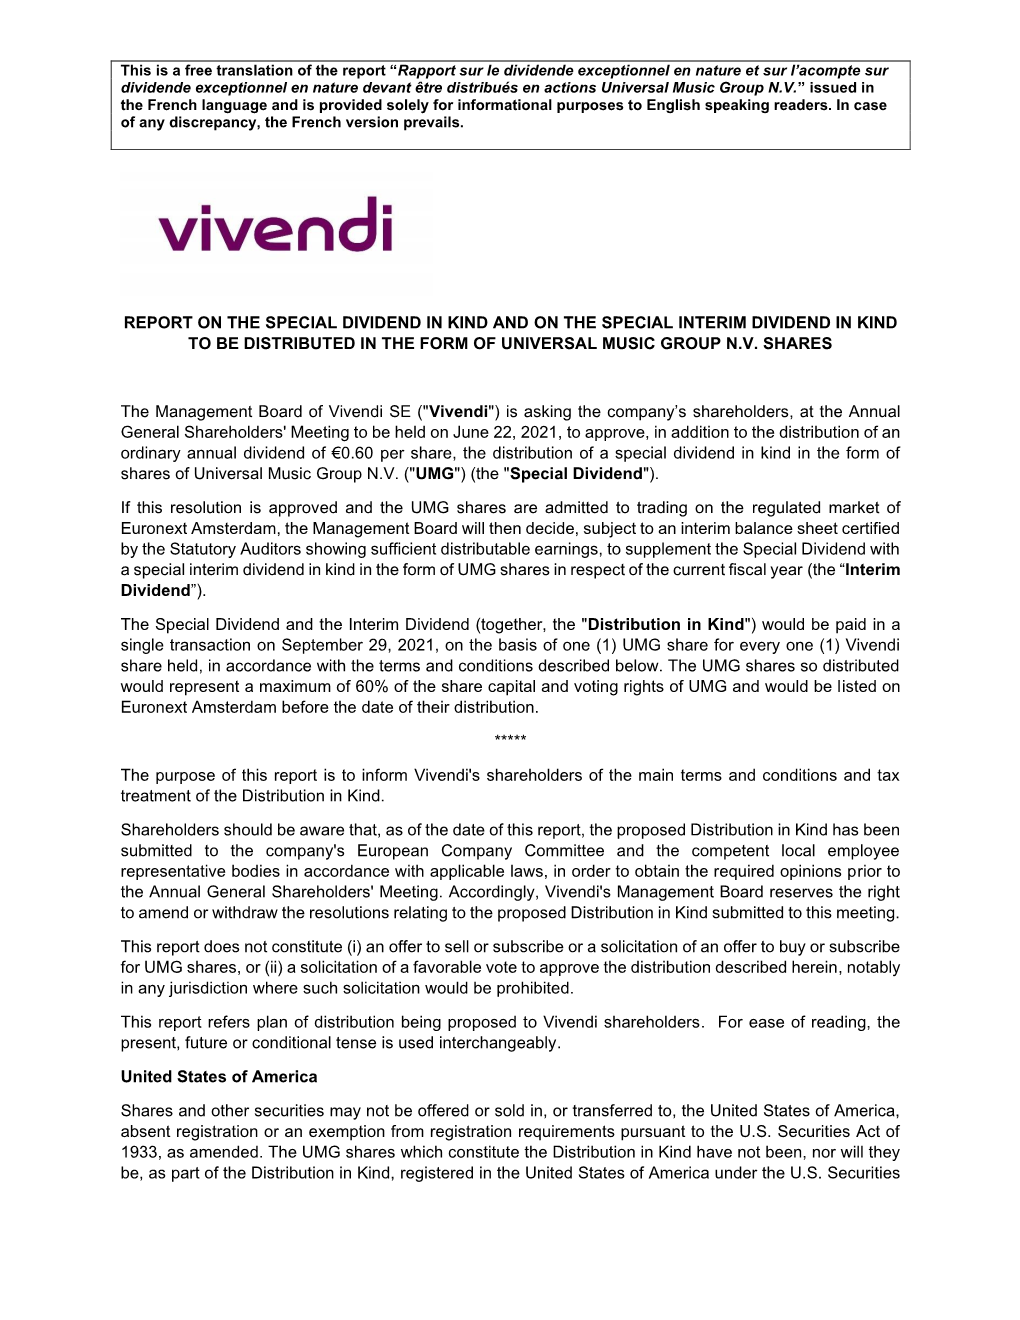 Report on the Special Dividend in Kind and on the Special Interim Dividend in Kind to Be Distributed in the Form of Universal Music Group N.V